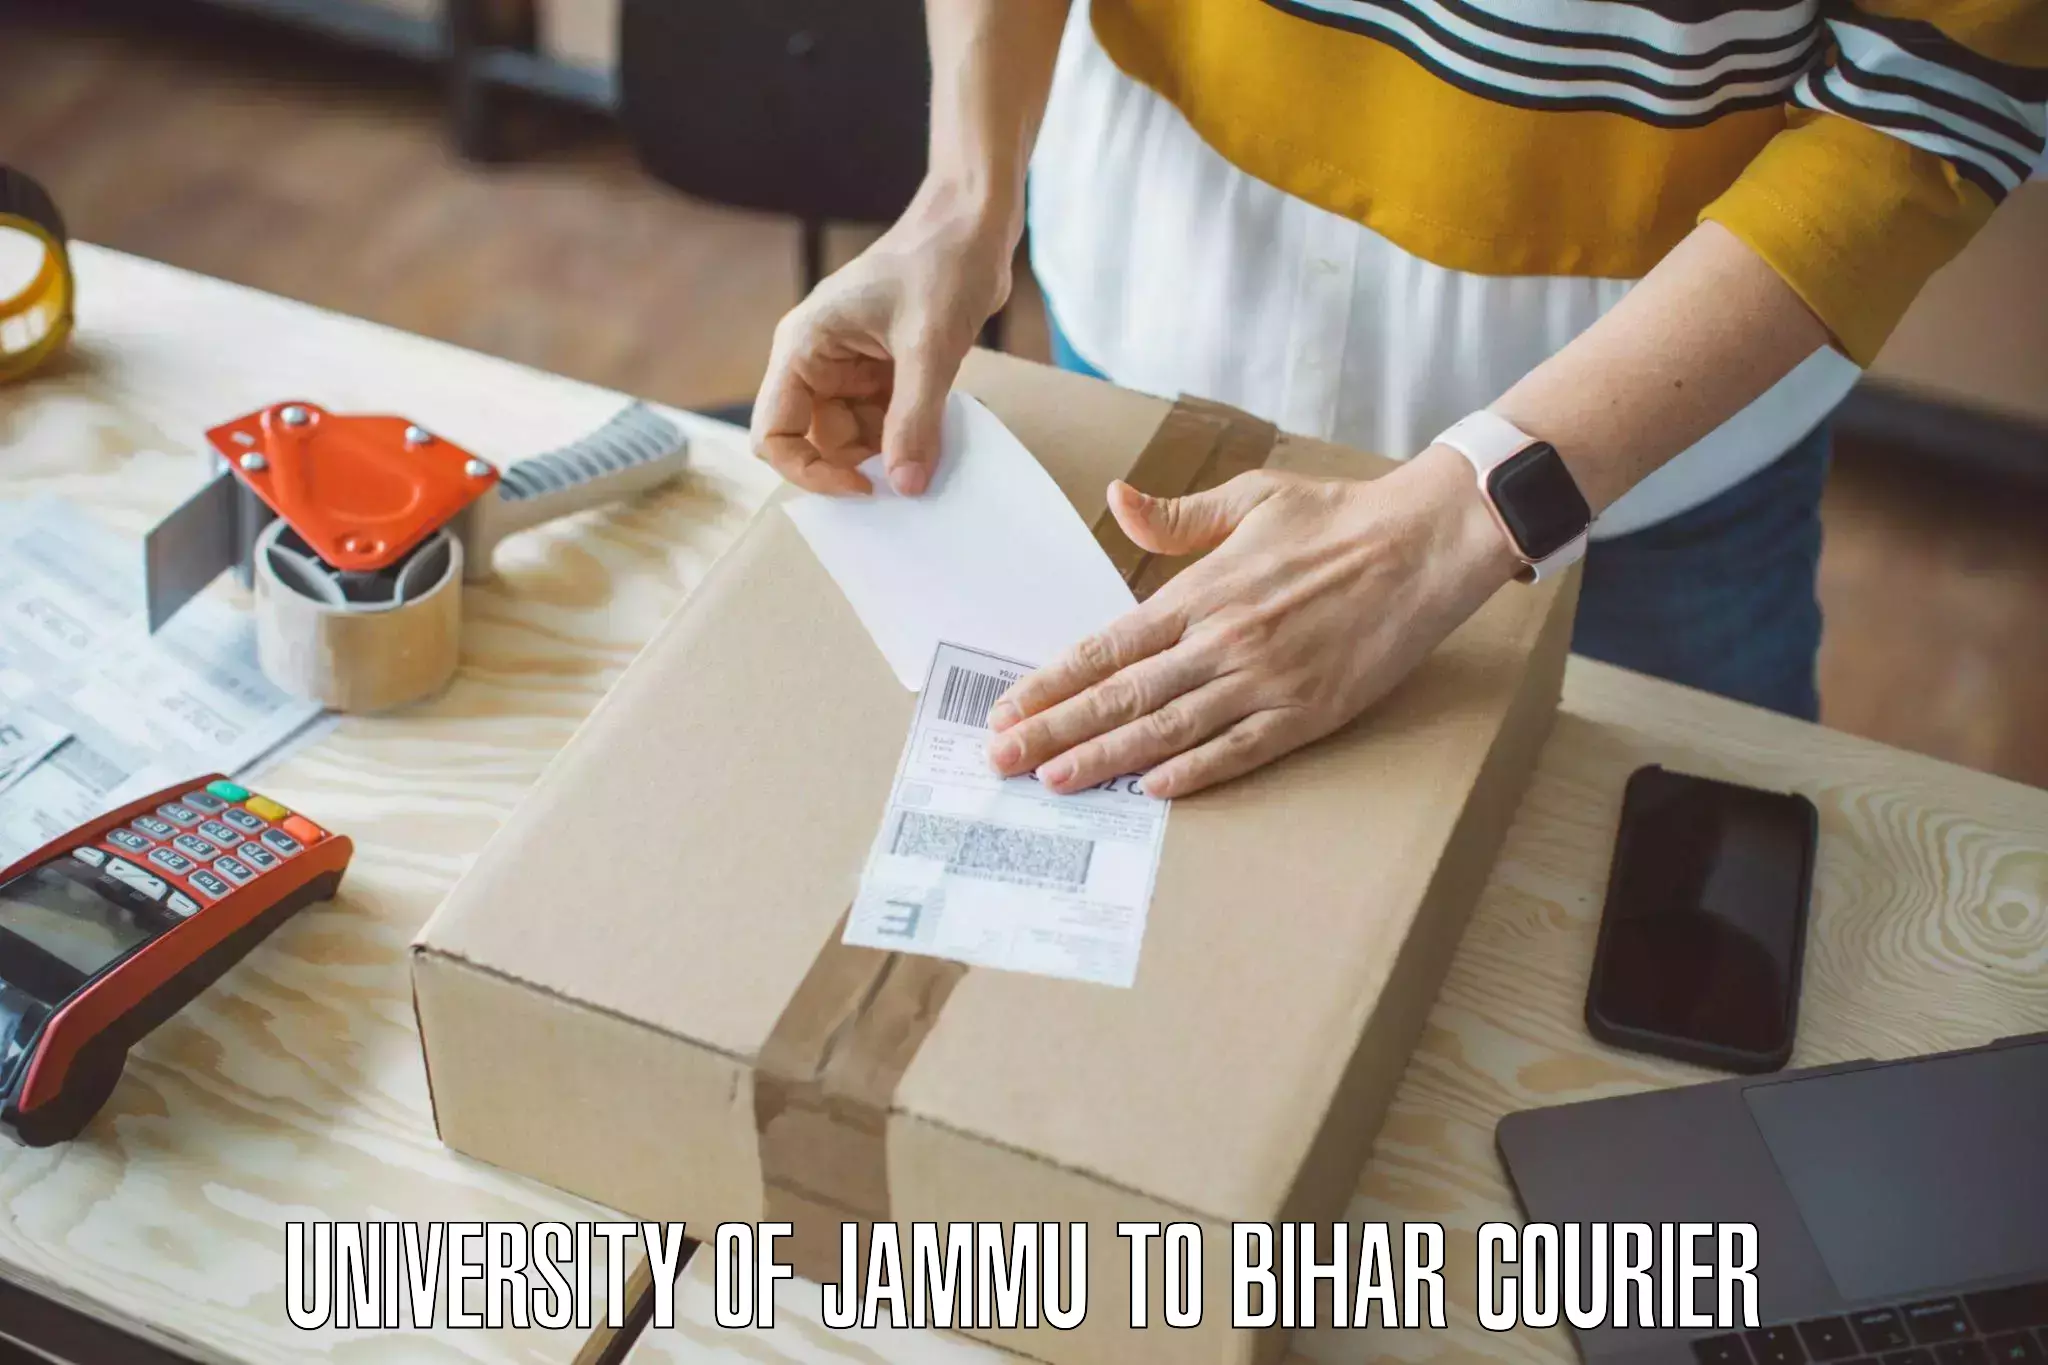 Trusted relocation experts University of Jammu to Sitamarhi